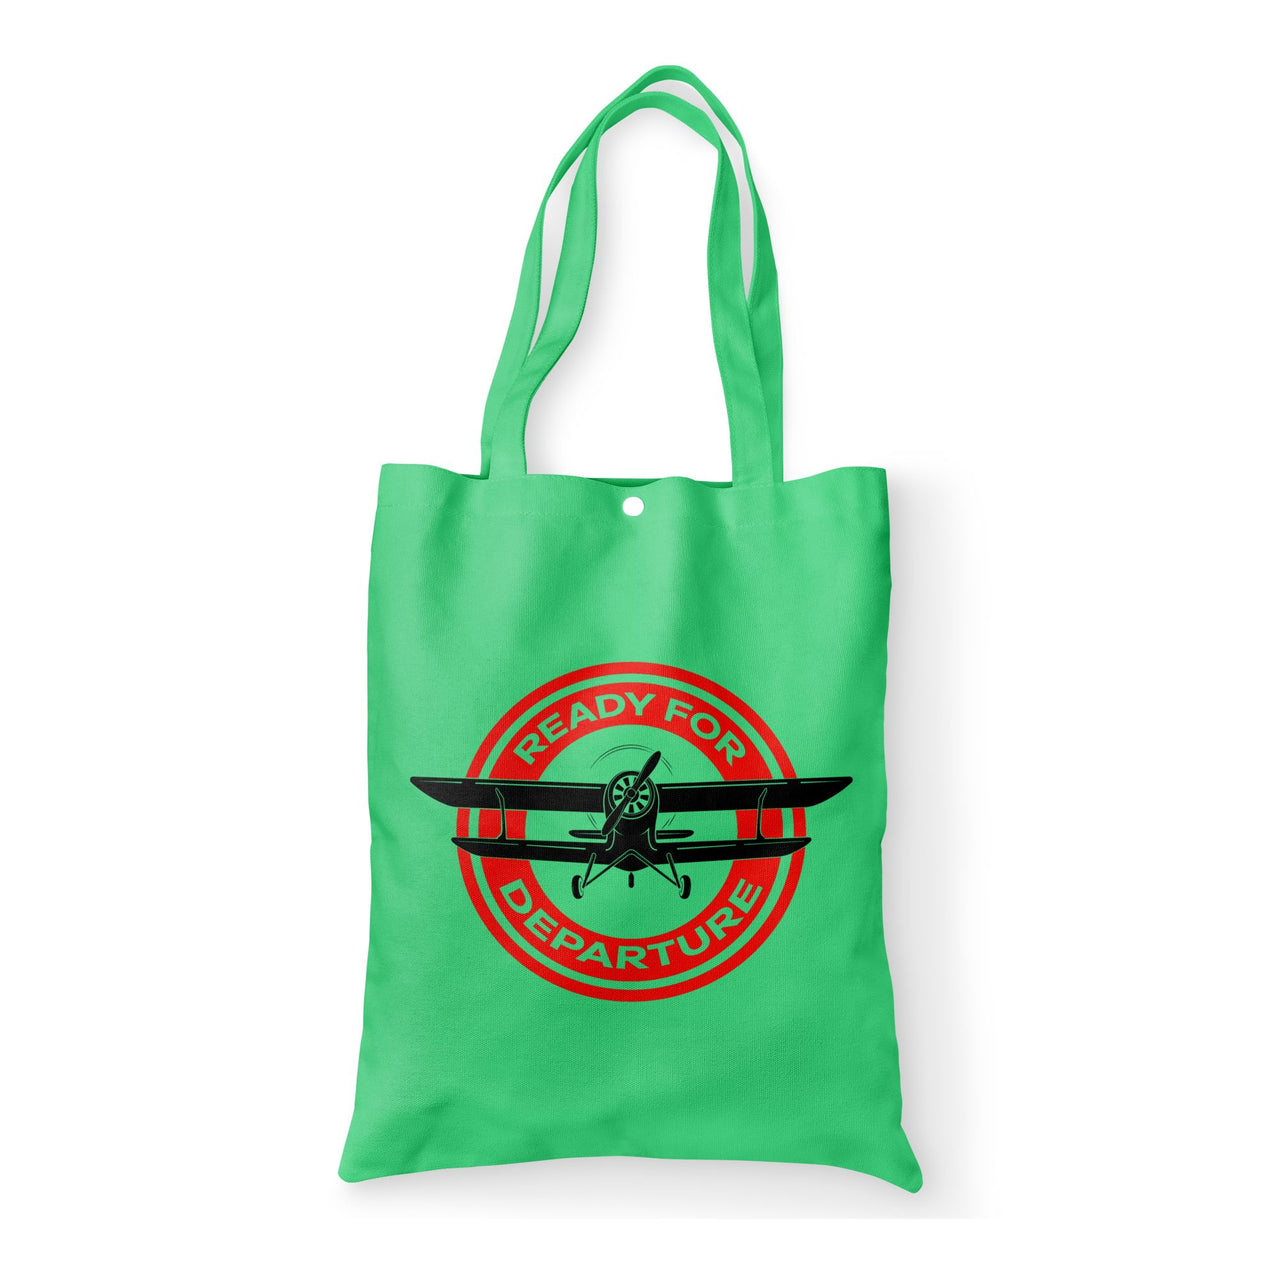 Ready for Departure Designed Tote Bags